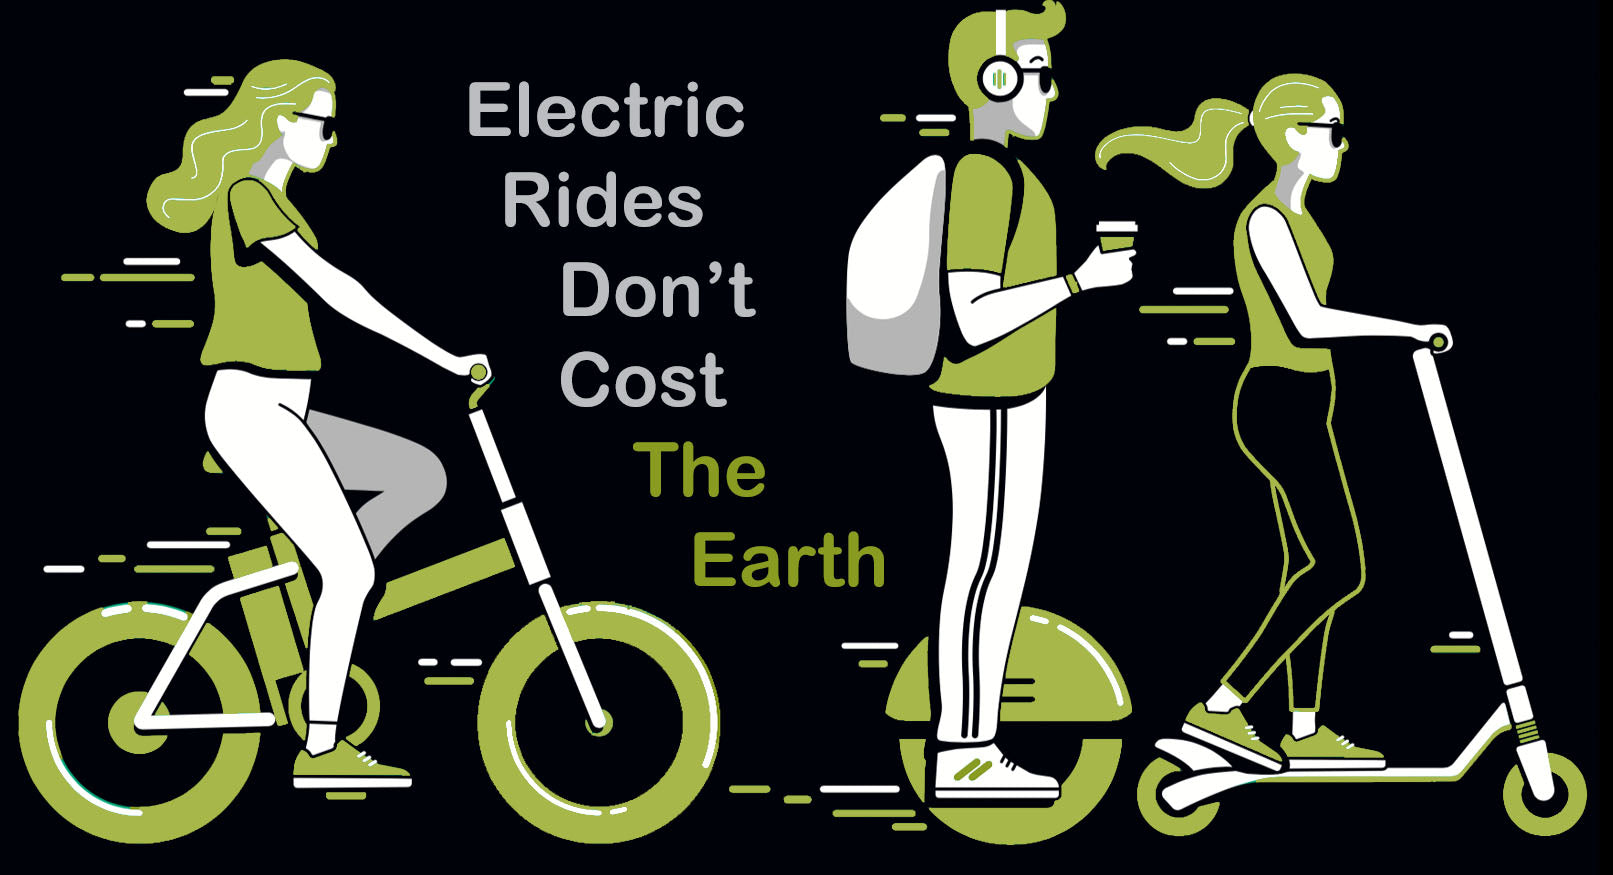 Electric Rides Don't Cost the Earth